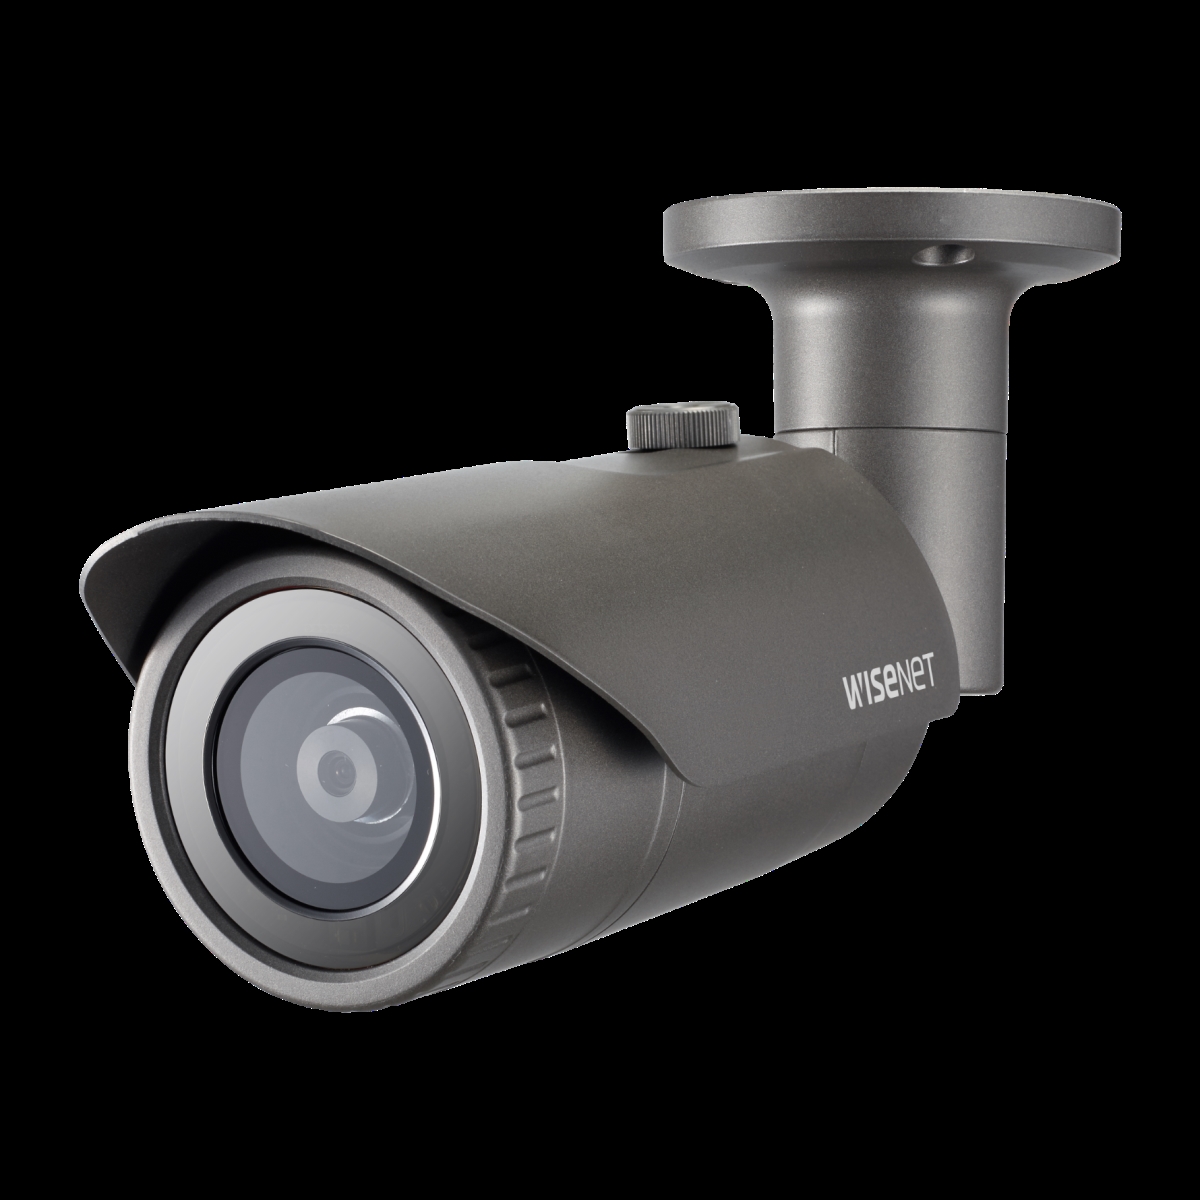 Picture of Hanwha QNO-6012R1 2.8 mm Lens Techwin WiseNet 2MP Outdoor Network Bullet Camera with Night Vision